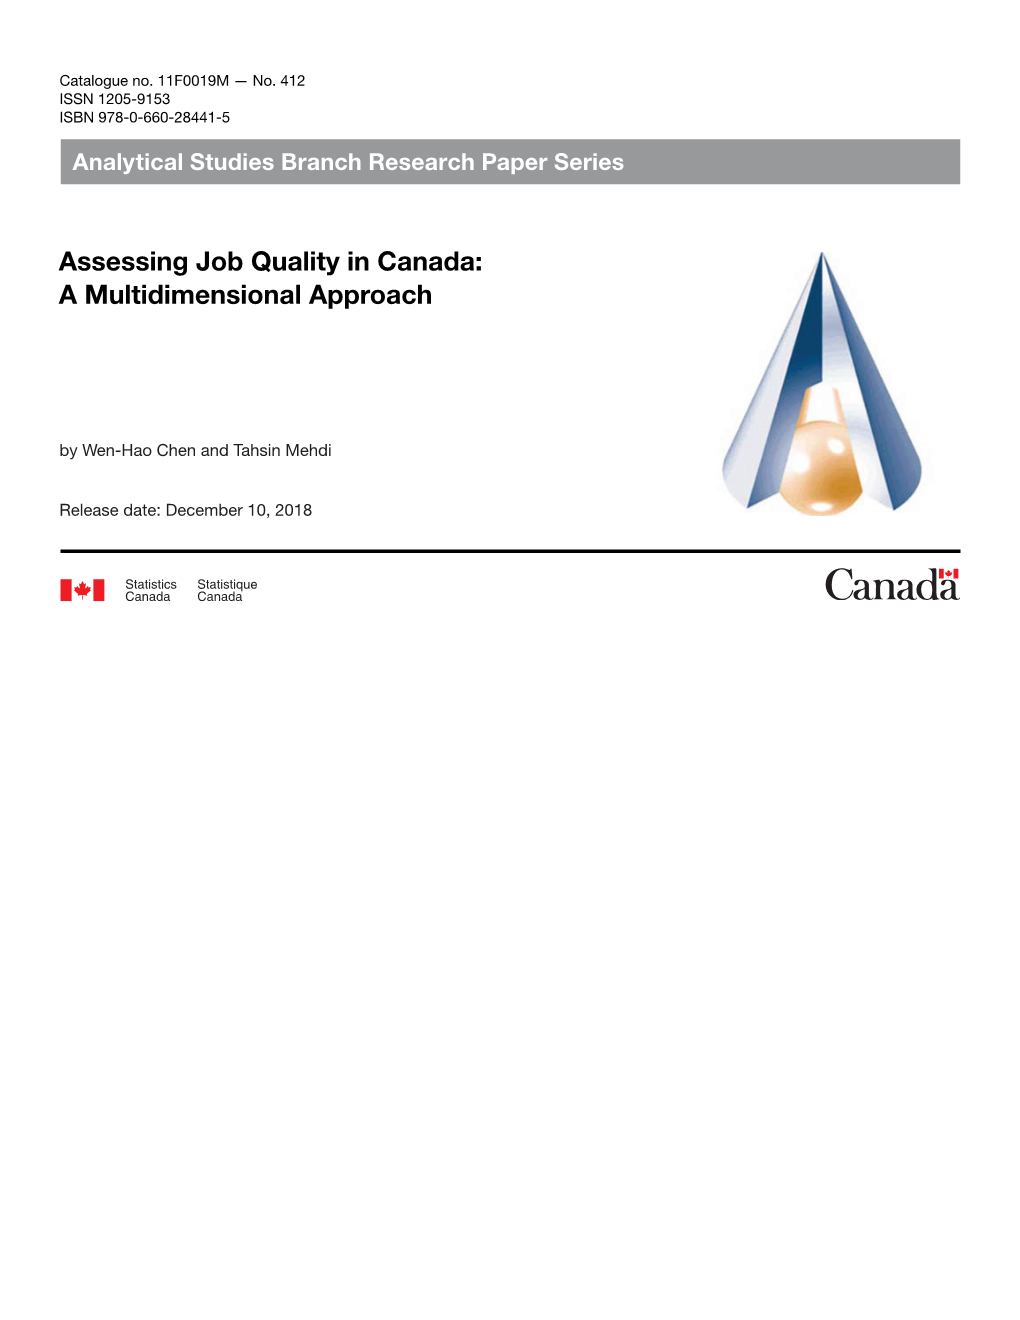 Assessing Job Quality in Canada: a Multidimensional Approach